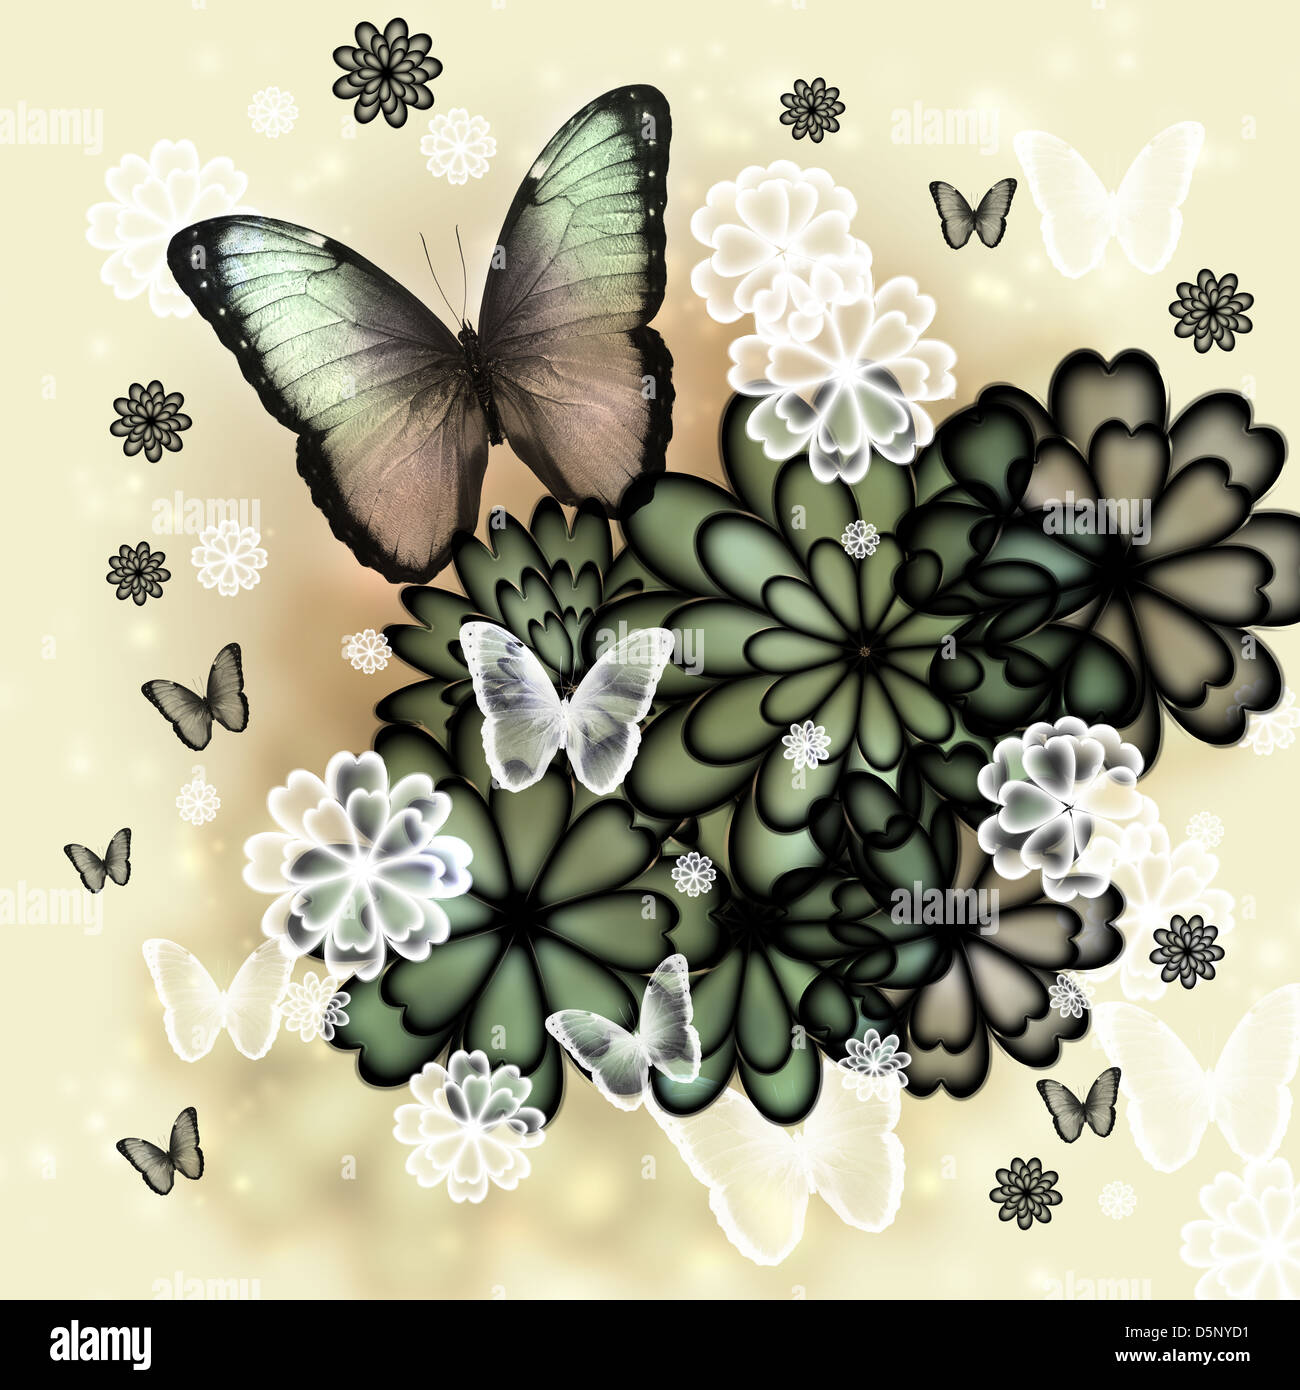 Butterflies and blossoms tinted illustration Stock Photo